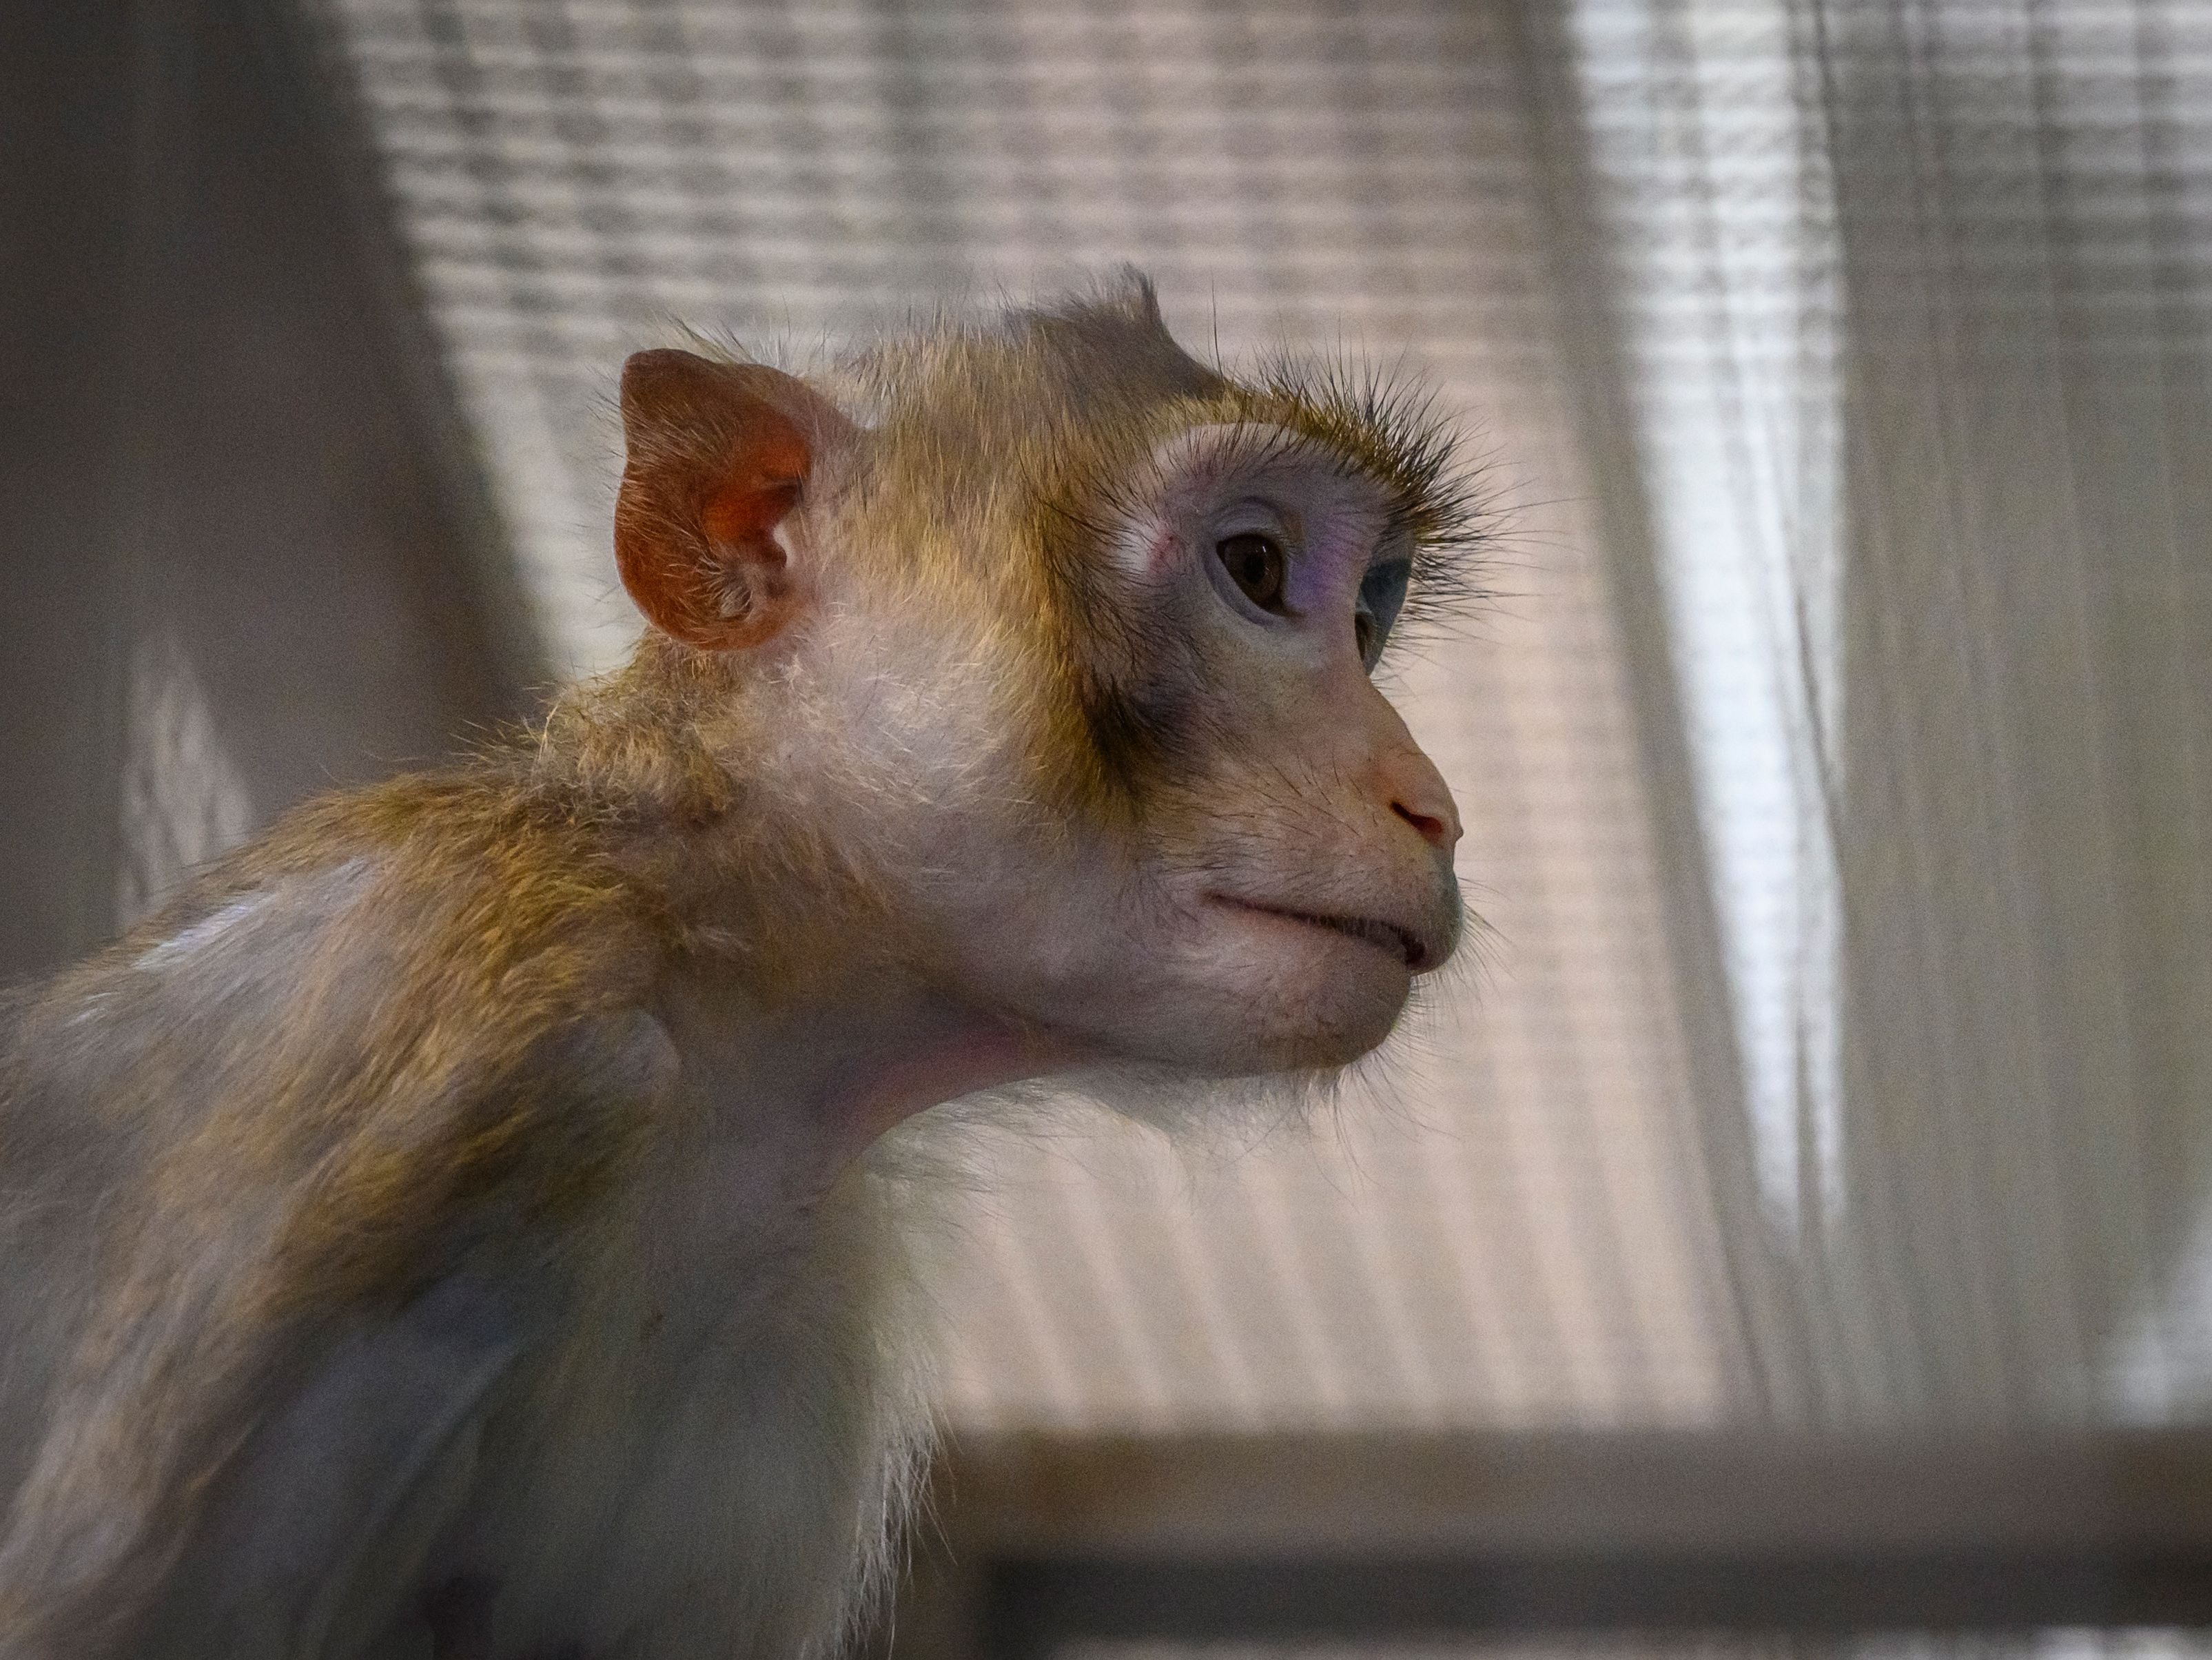 27 monkeys were put to death at Ames research center in California’s Silicon Valley last year, a report by the Guardian has claimed